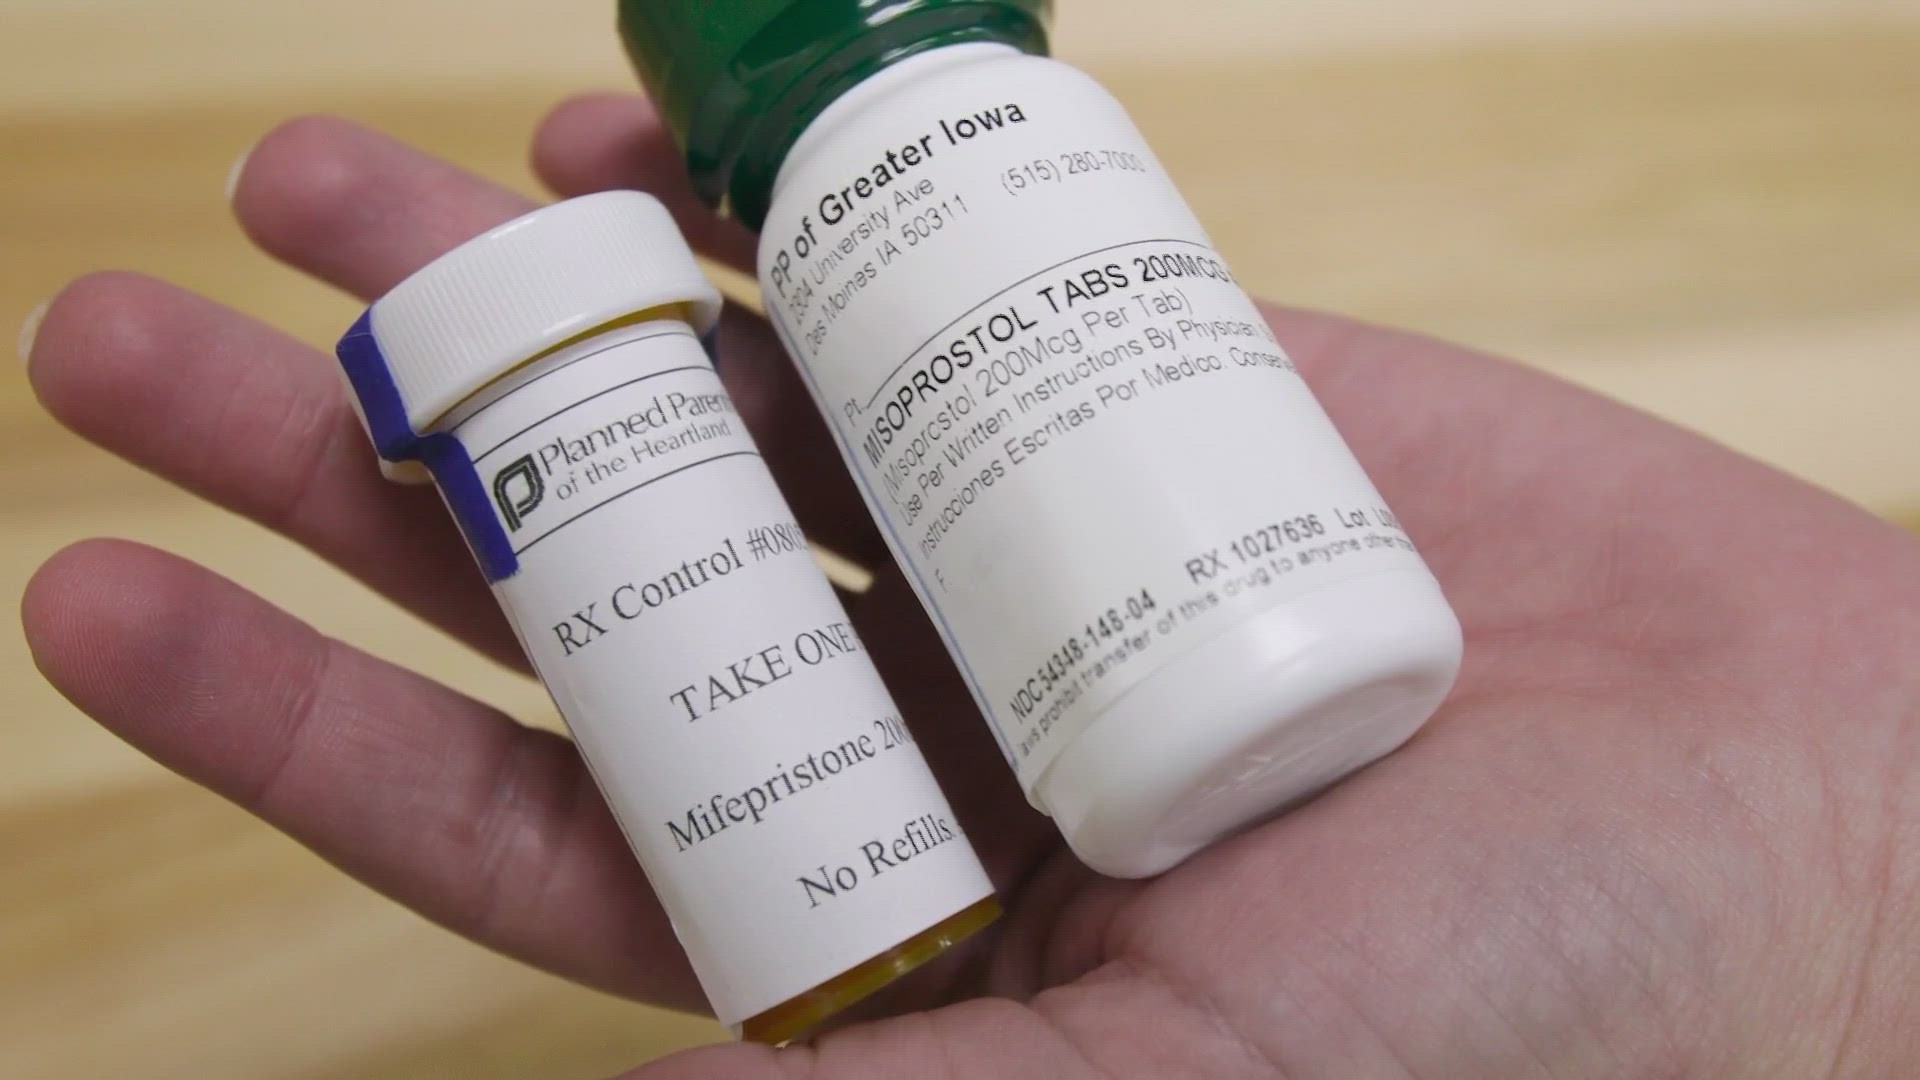 A judge in Texas could reverse the FDA approval of the drug.